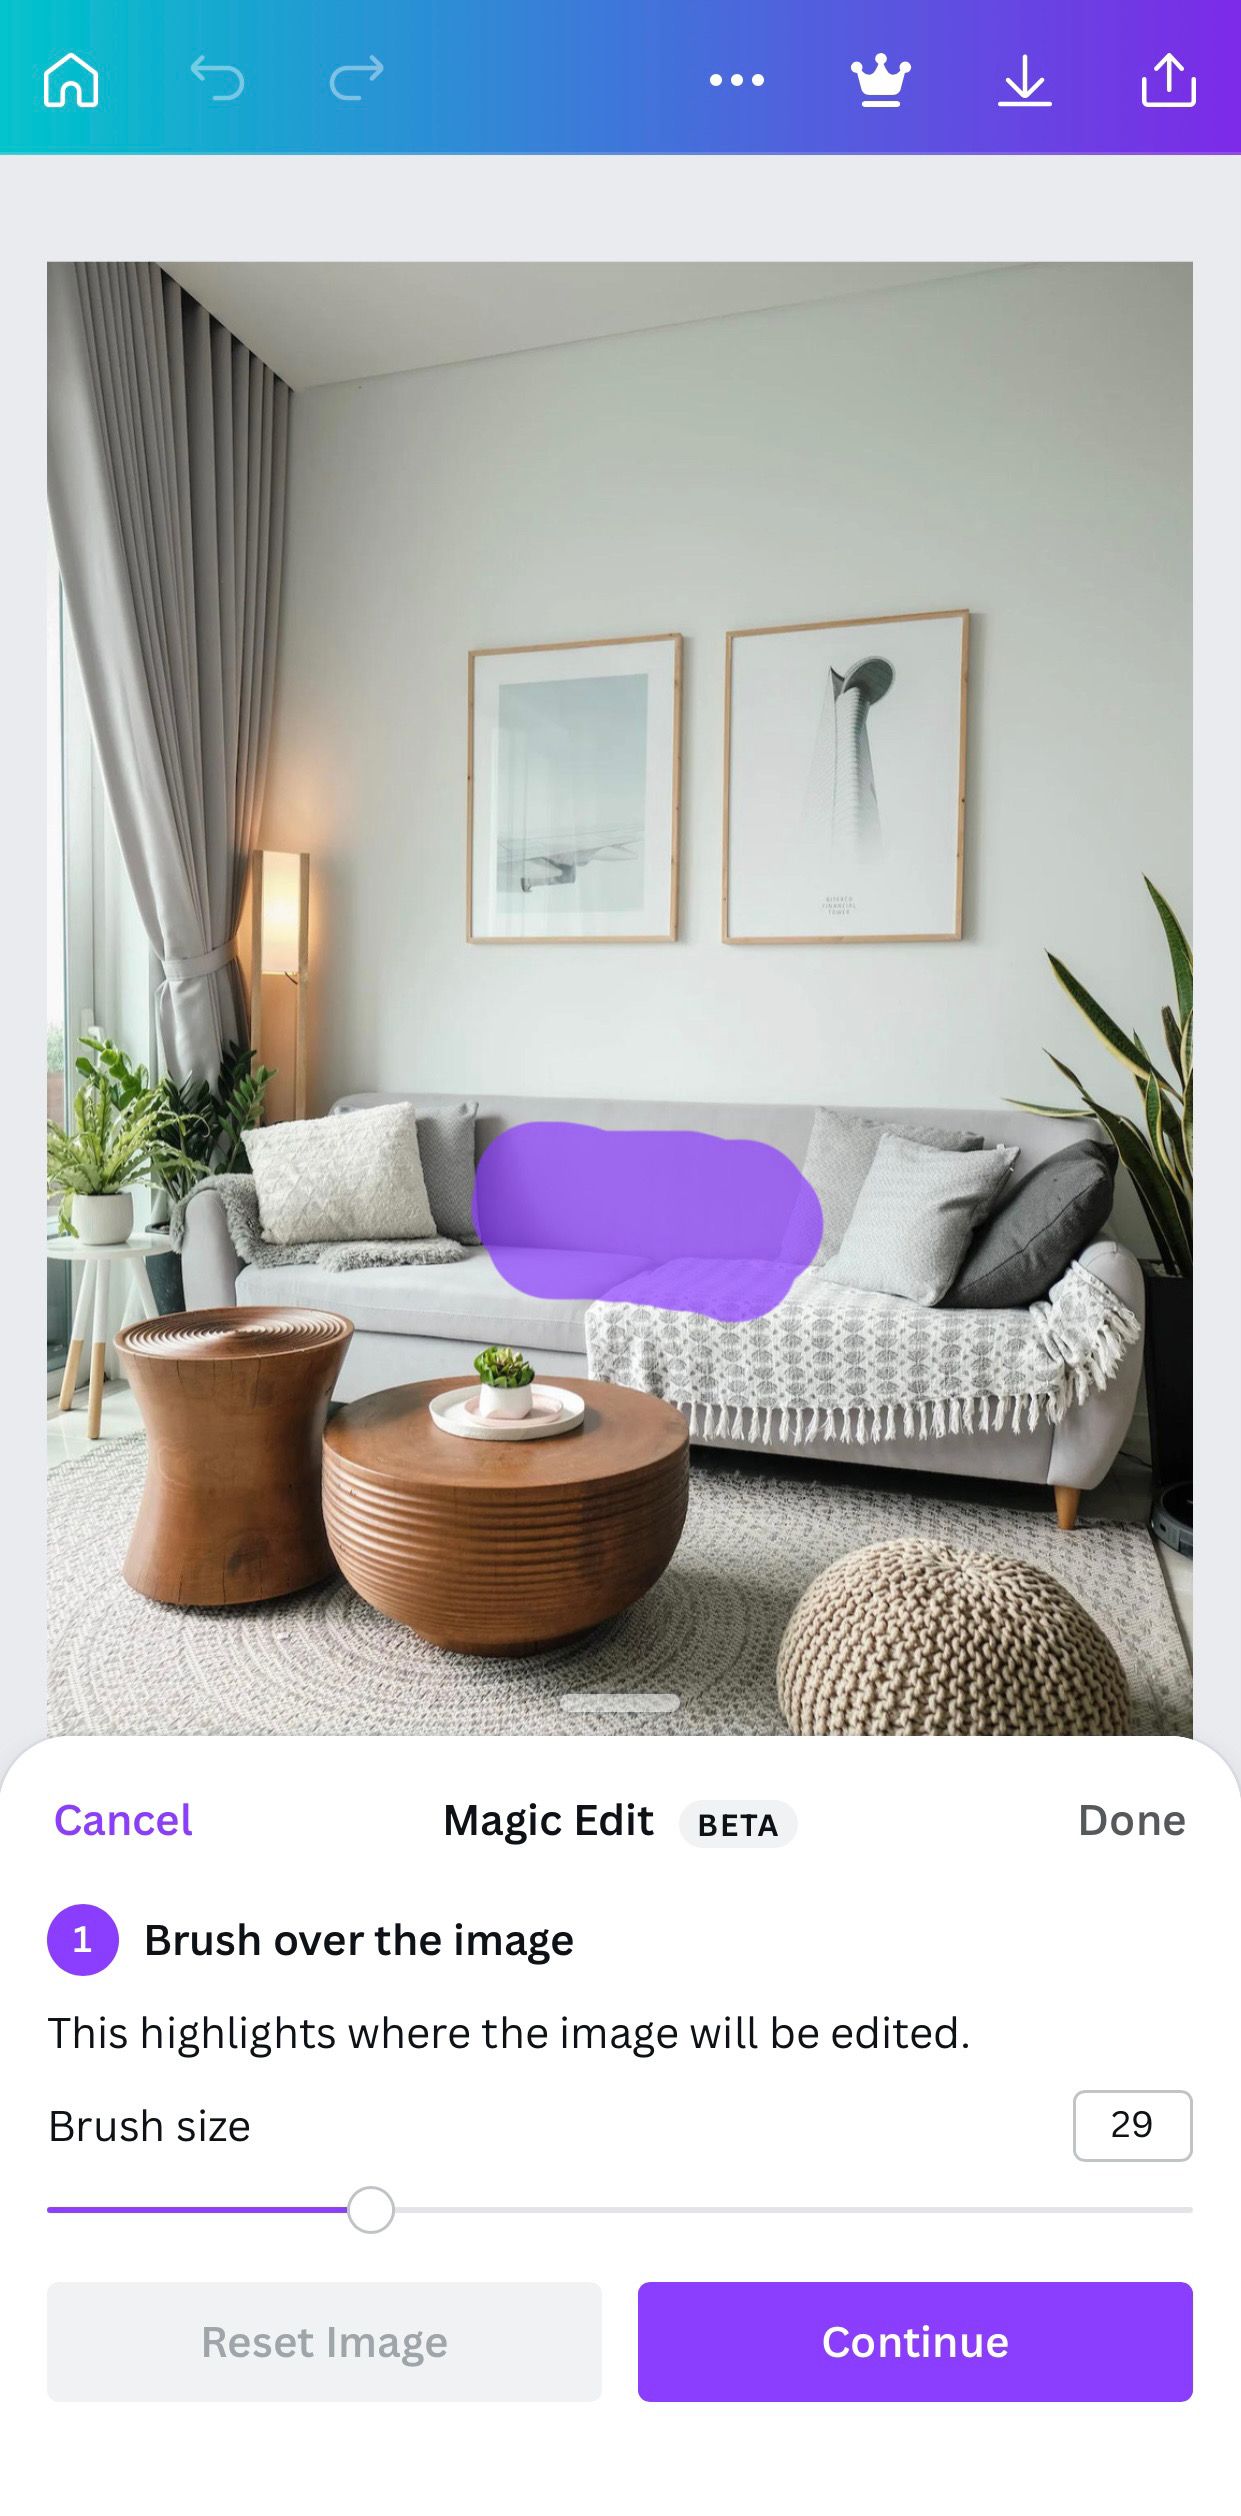 Modern, cozy living room with purple area brushed over for editing